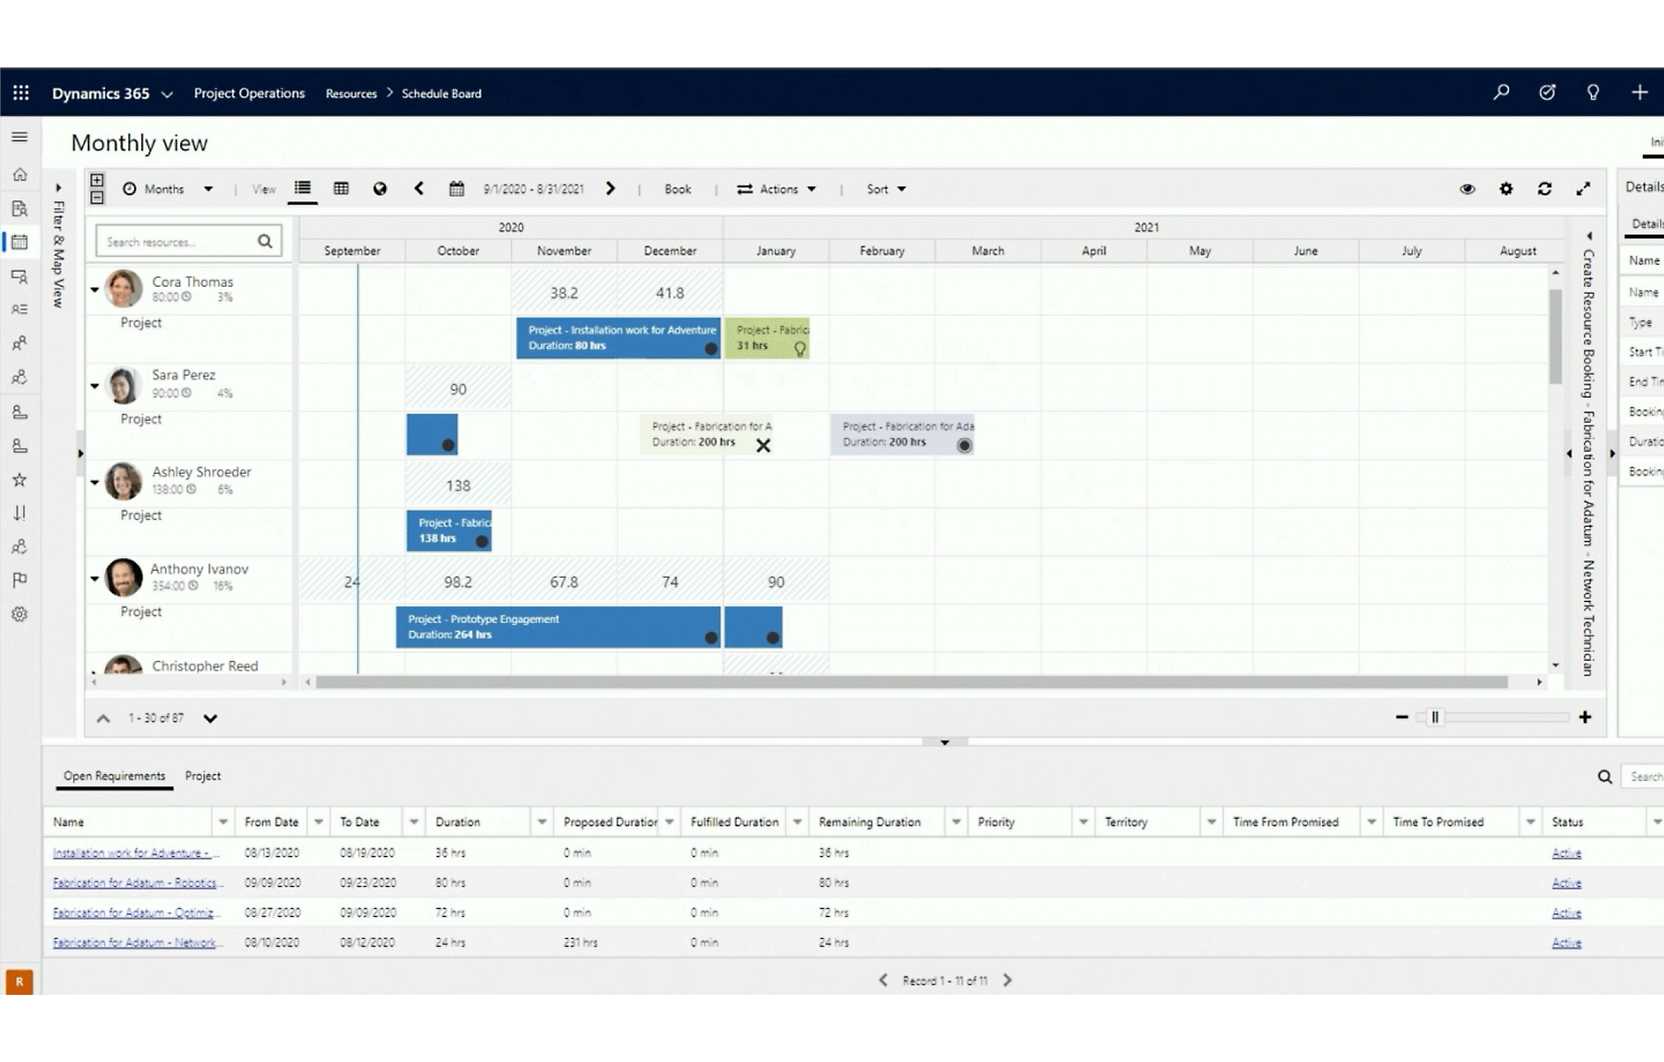 A screenshot of a computer interface showing a detailed project management software with a calendar view of tasks